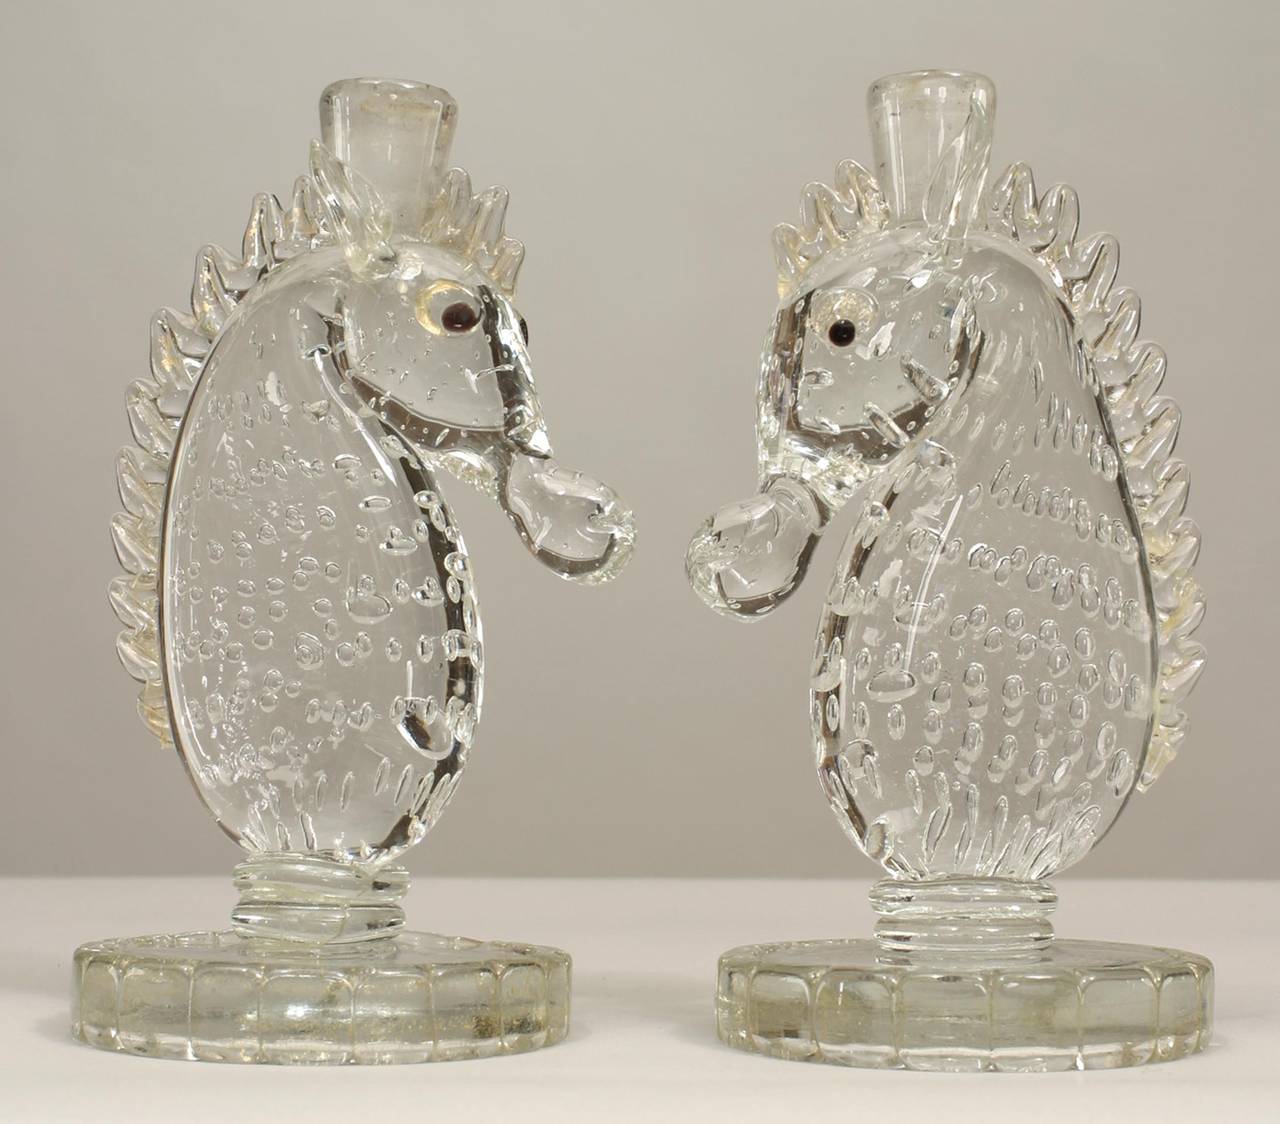 Pair of 1940's Italian 1940s Murano glass seahorse design candlesticks on round bases. Signed Barovier e Toso, and numbered 1 and 3 from a limited edition of thirty pieces.